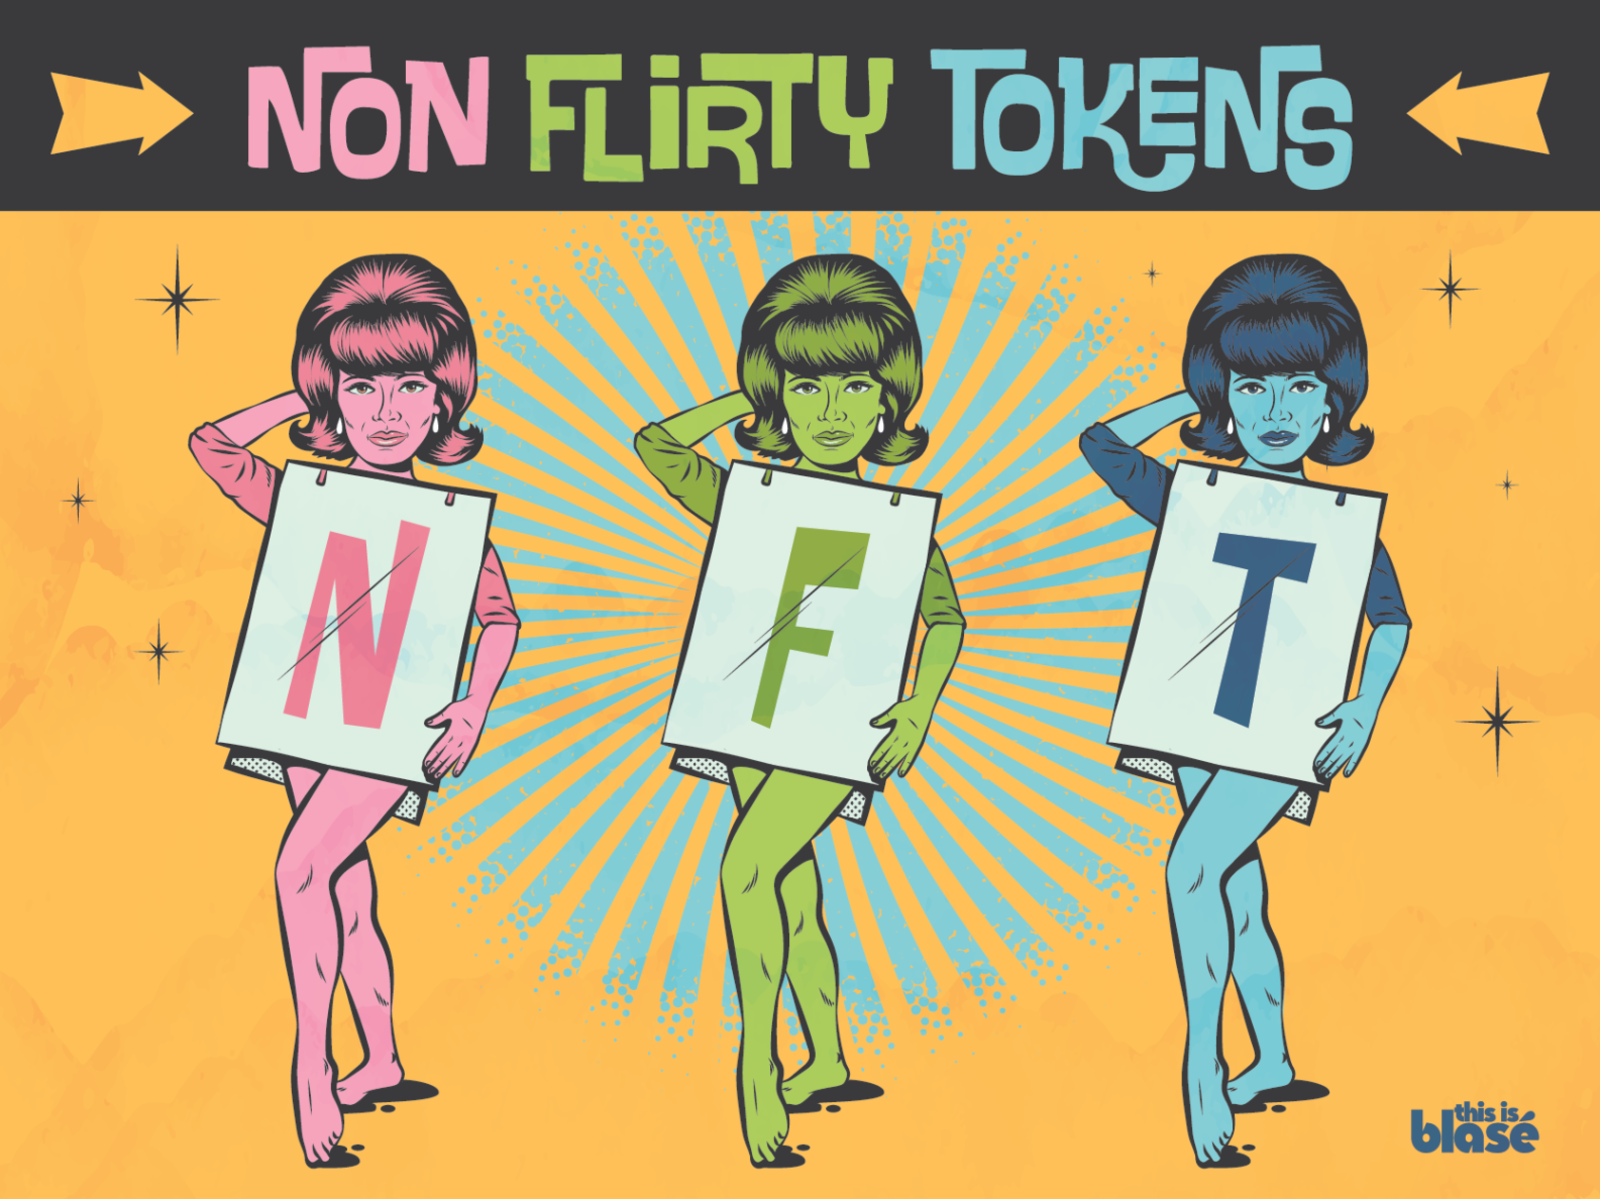 NFT... Non Flirty Tokens coinbase color crypto design ethereum fifities girl illustration lettering music nft retro sixties typography vector vintage